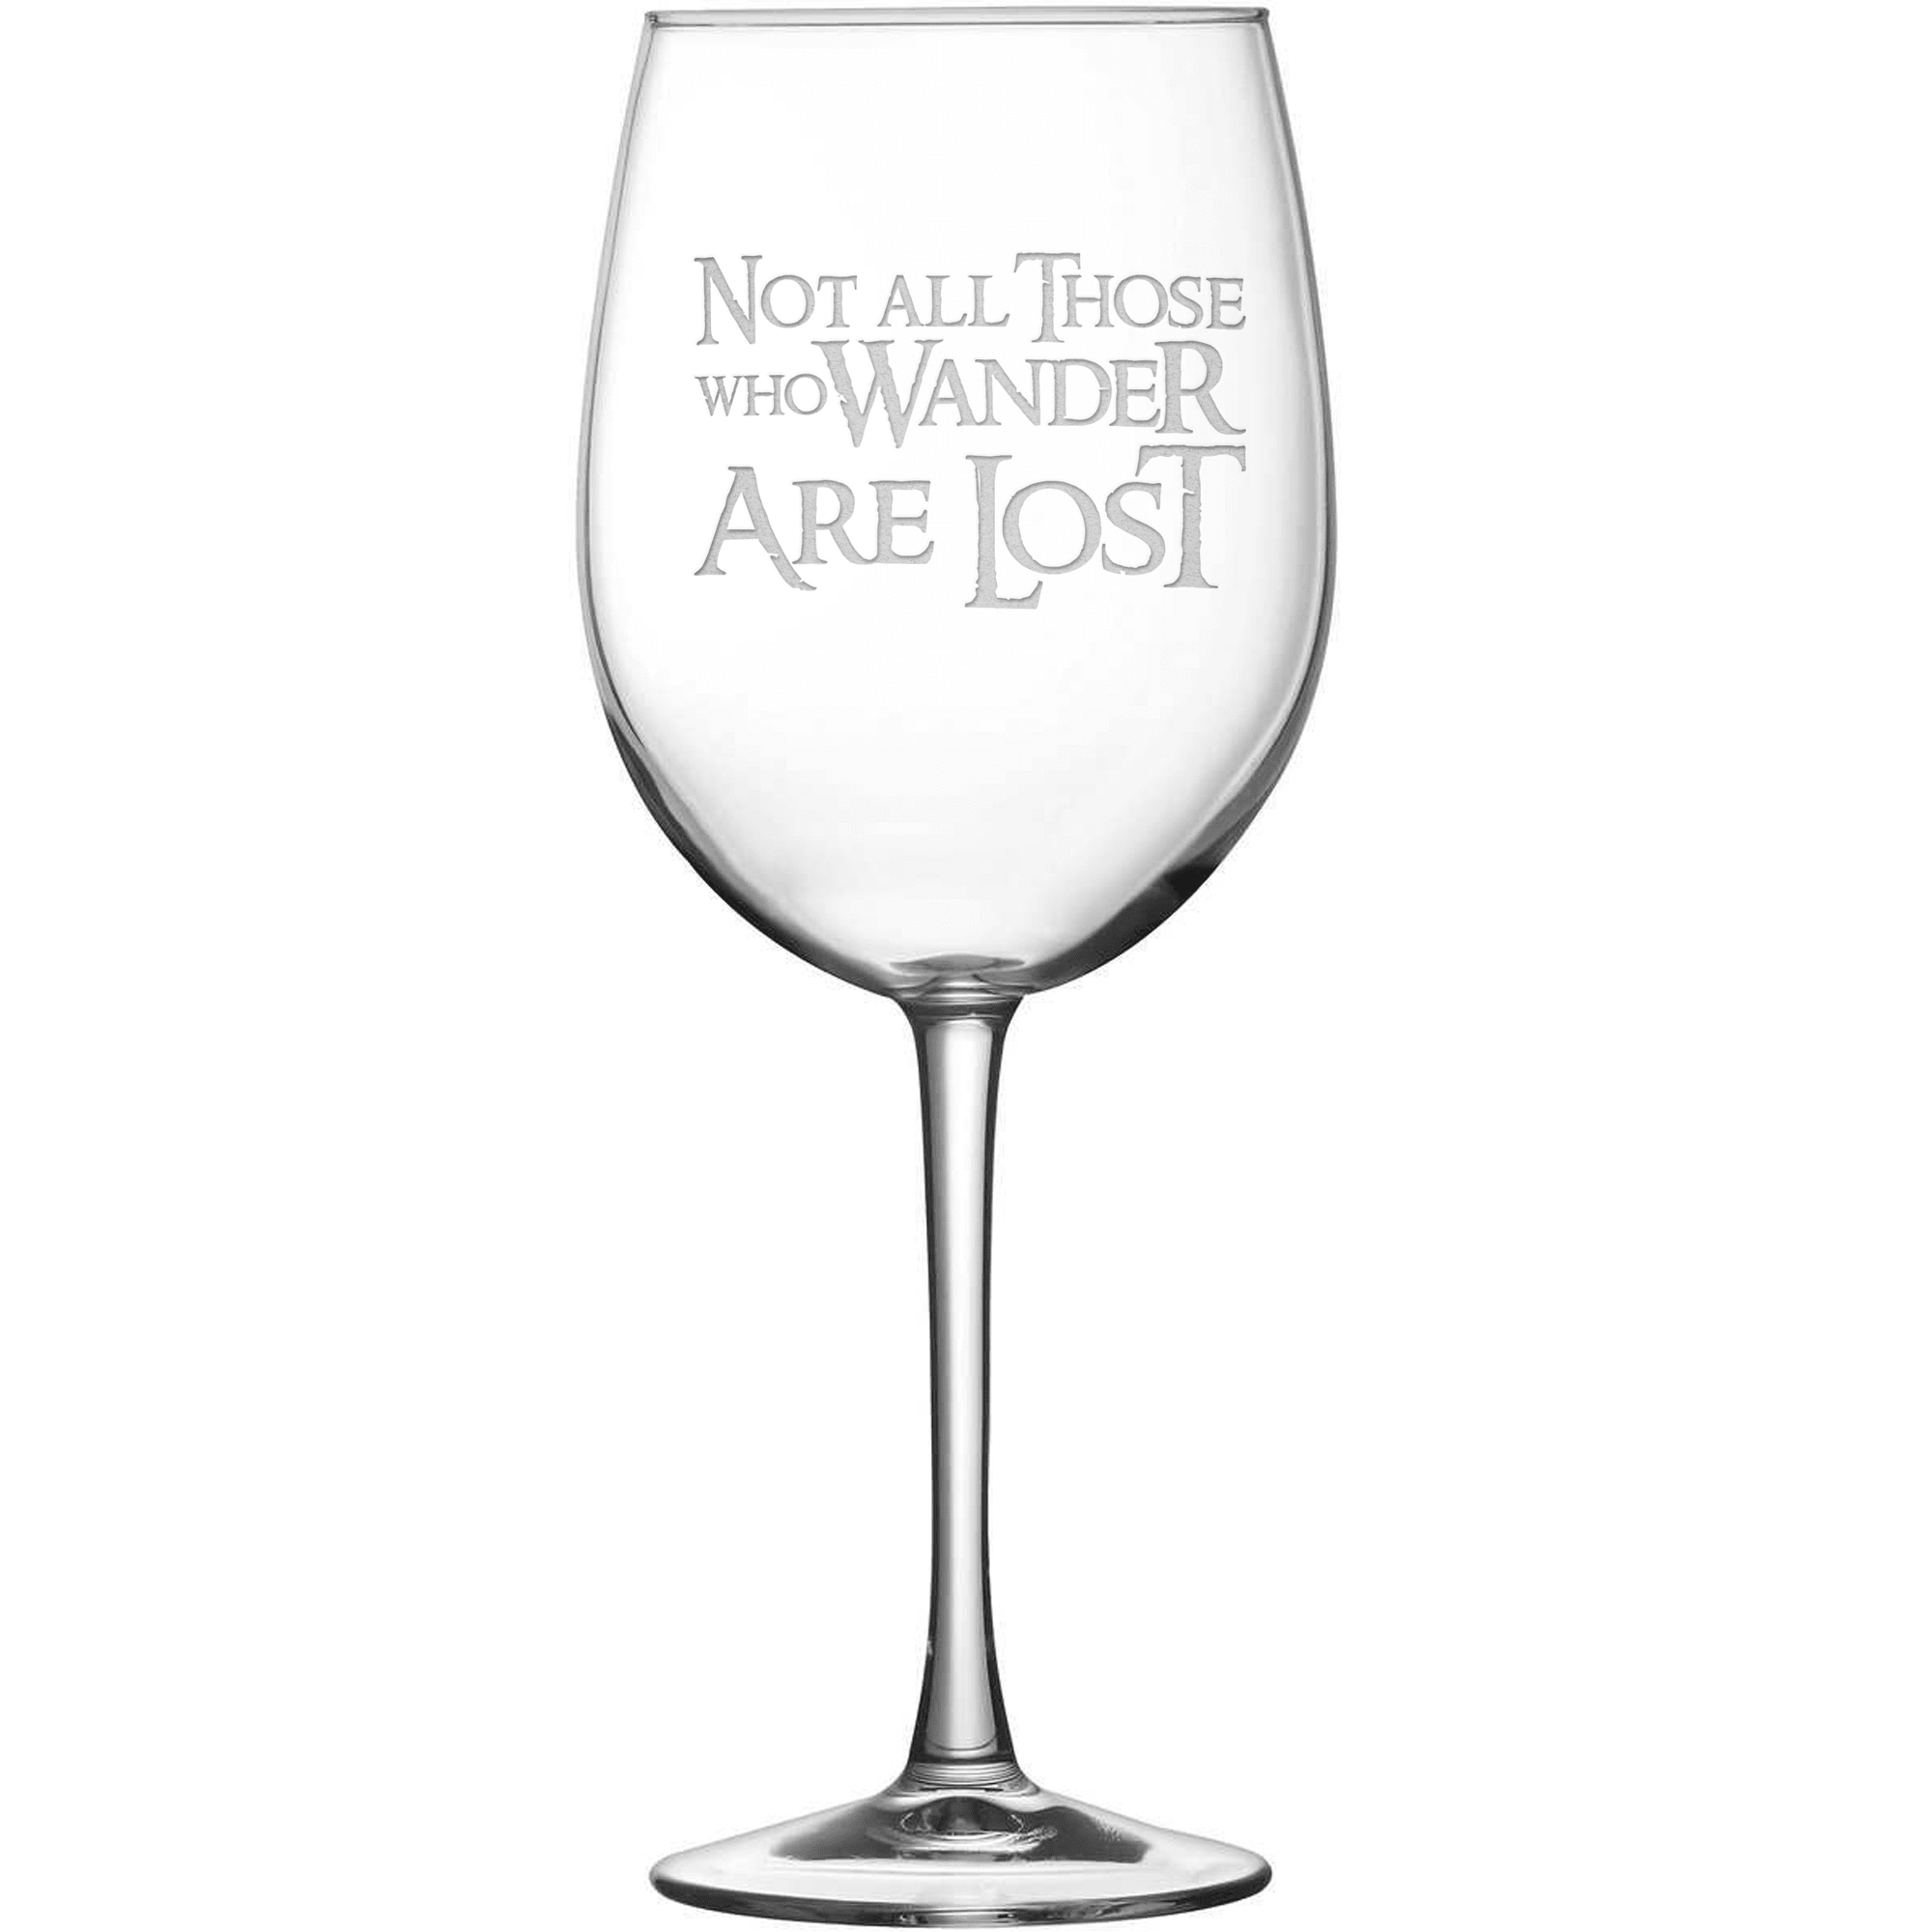 Tulip Wine Glass with Lord of the Rings Quote, Not All Those Who Wander Are Lost, Hand Etched by Integrity Bottles